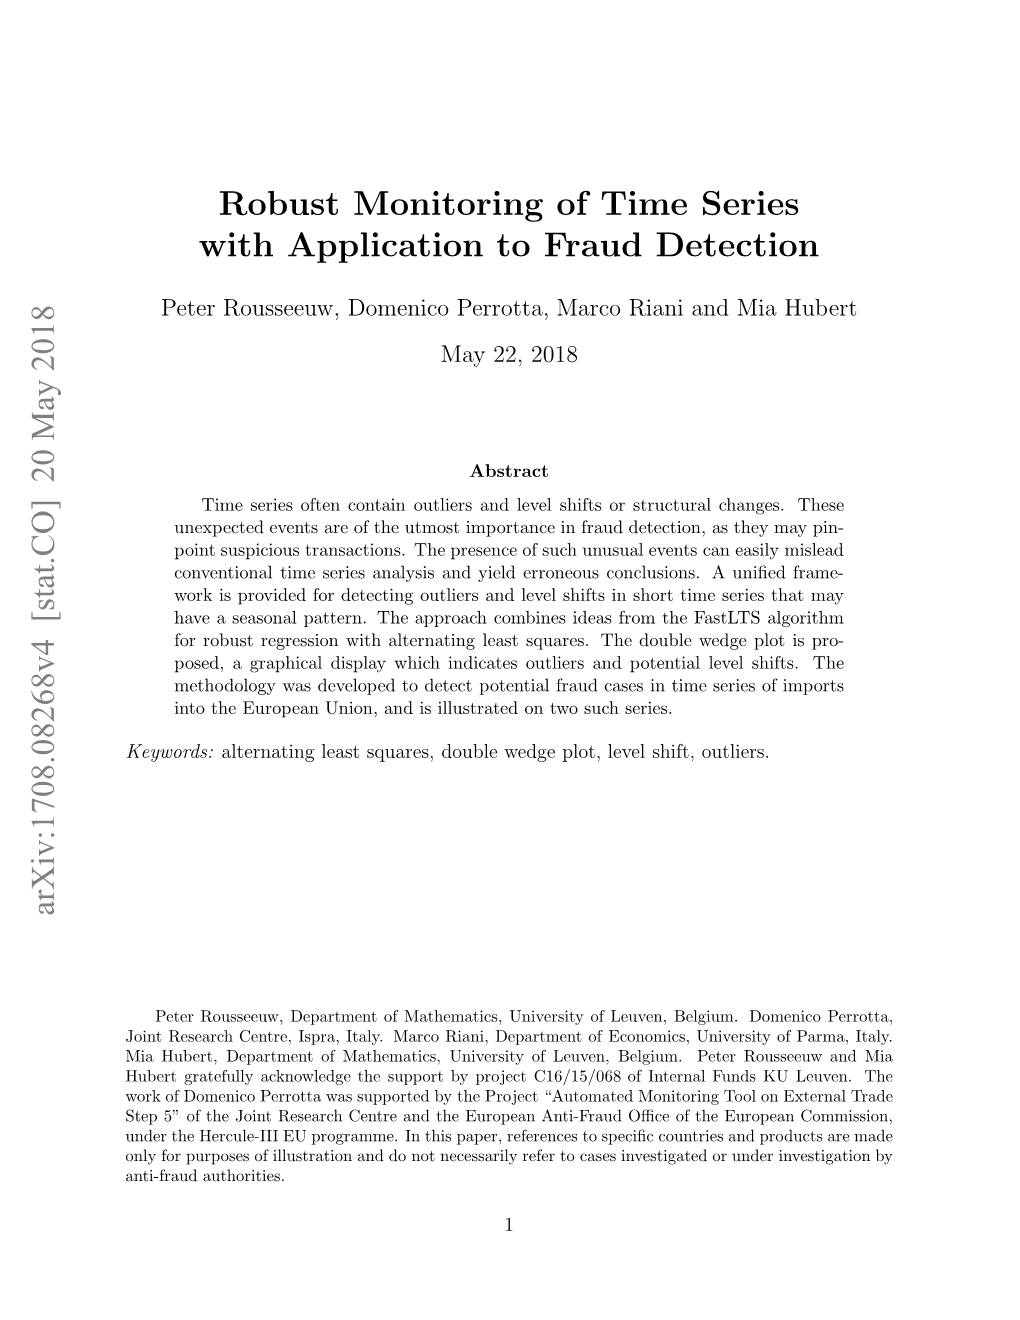 Robust Monitoring of Time Series with Application to Fraud Detection